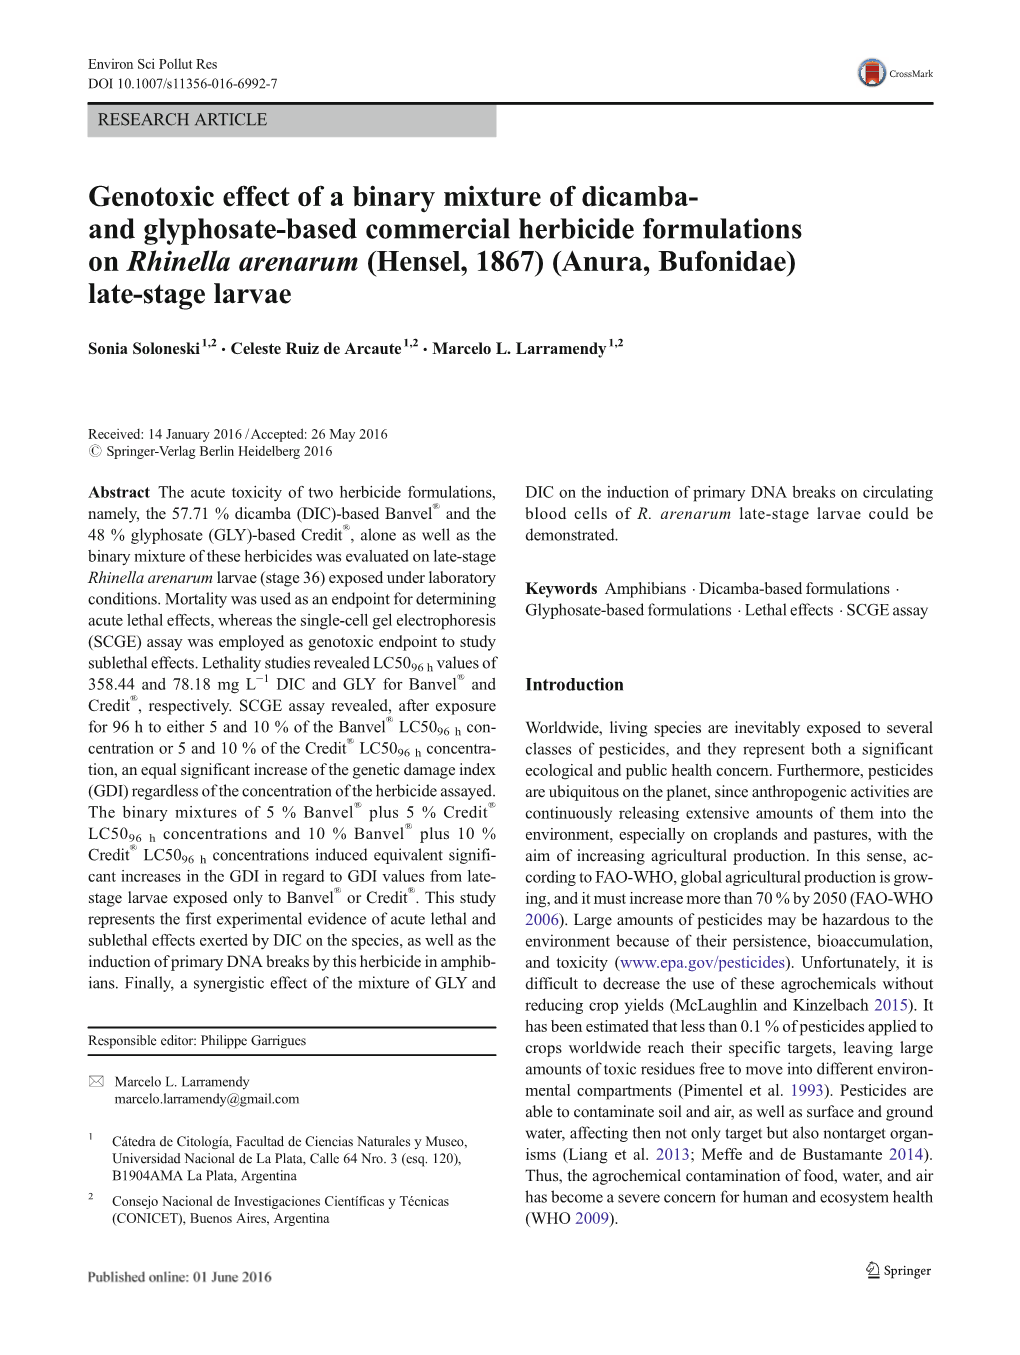 Genotoxic Effect of a Binary Mixture of Dicamba- and Glyphosate-Based